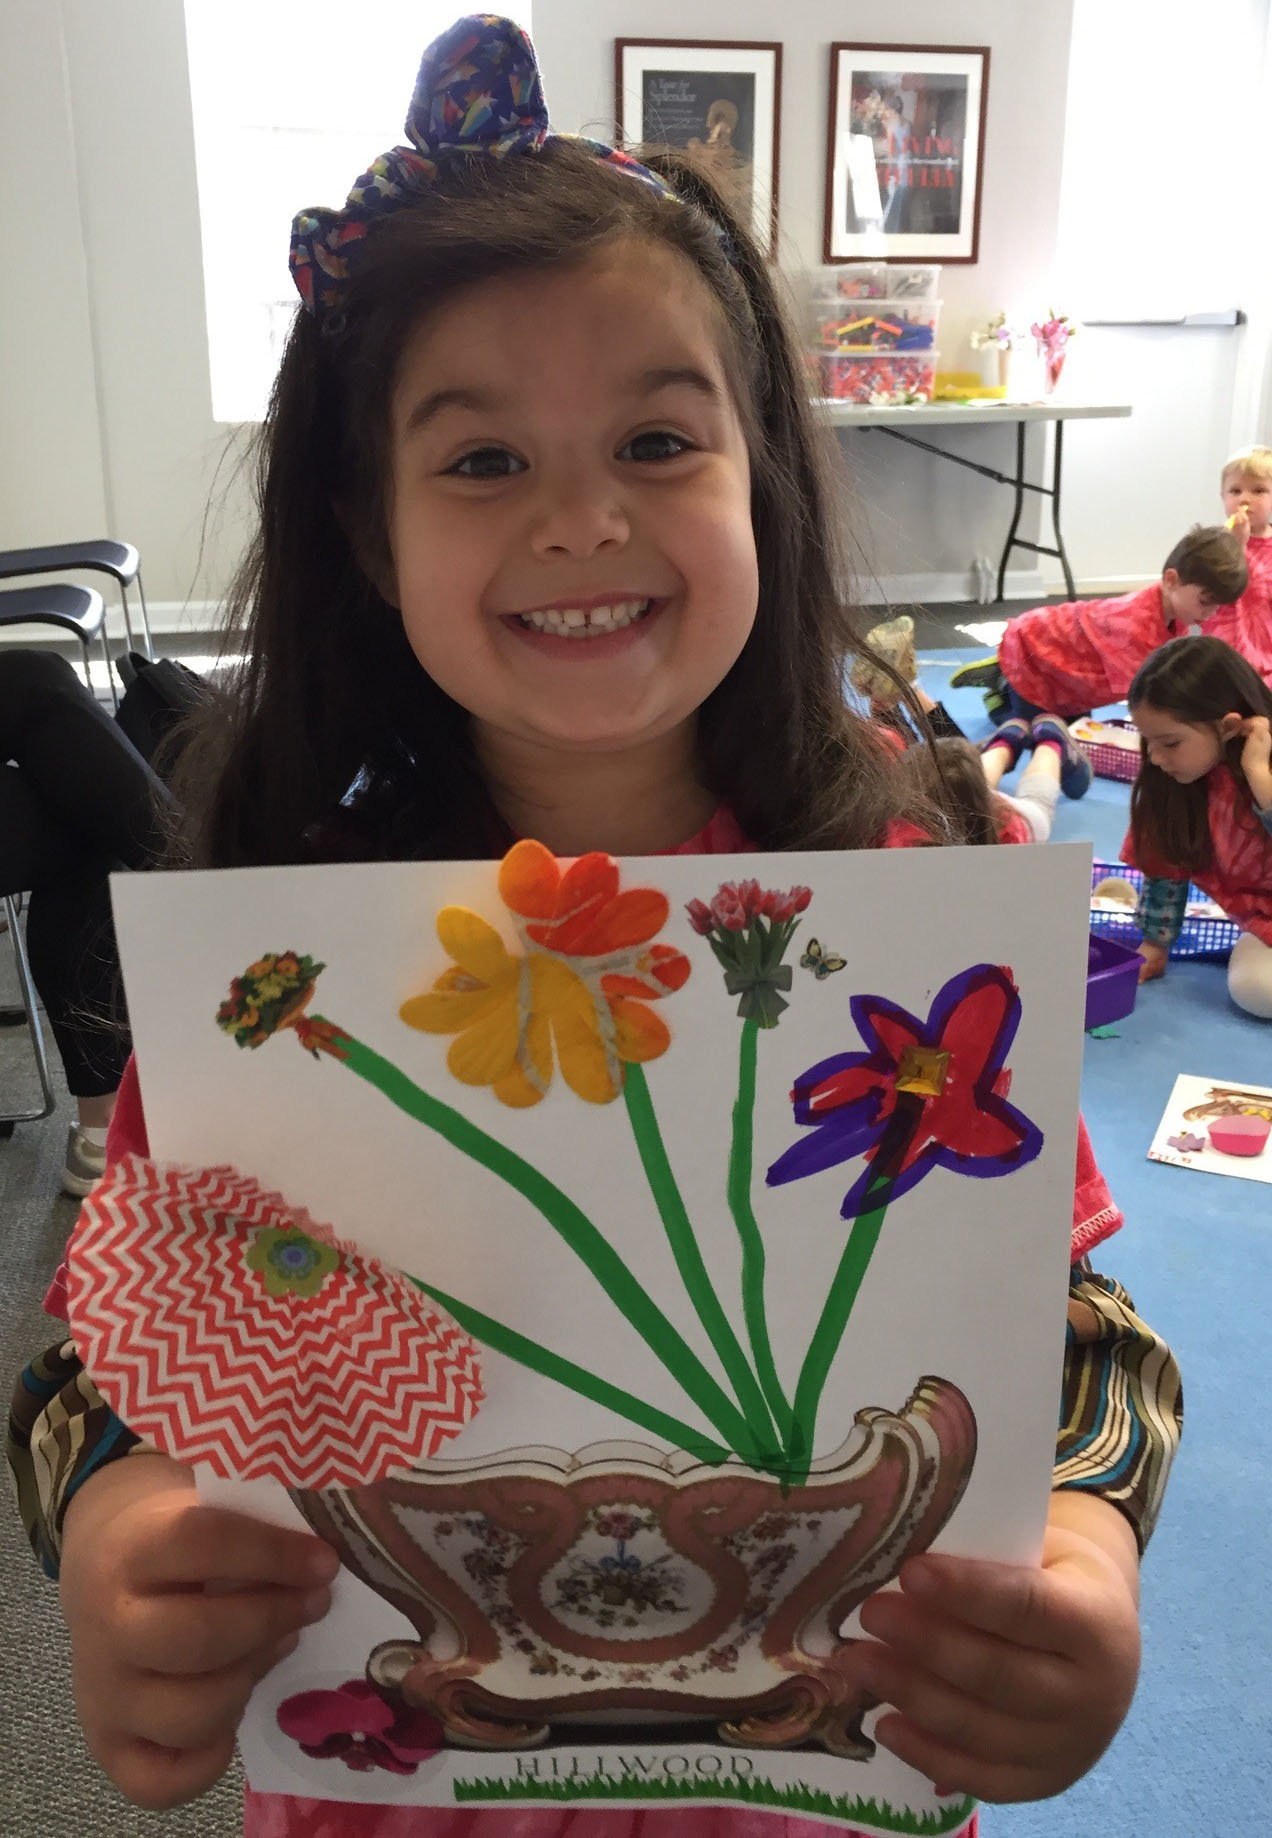 preschooler holding up completed art project